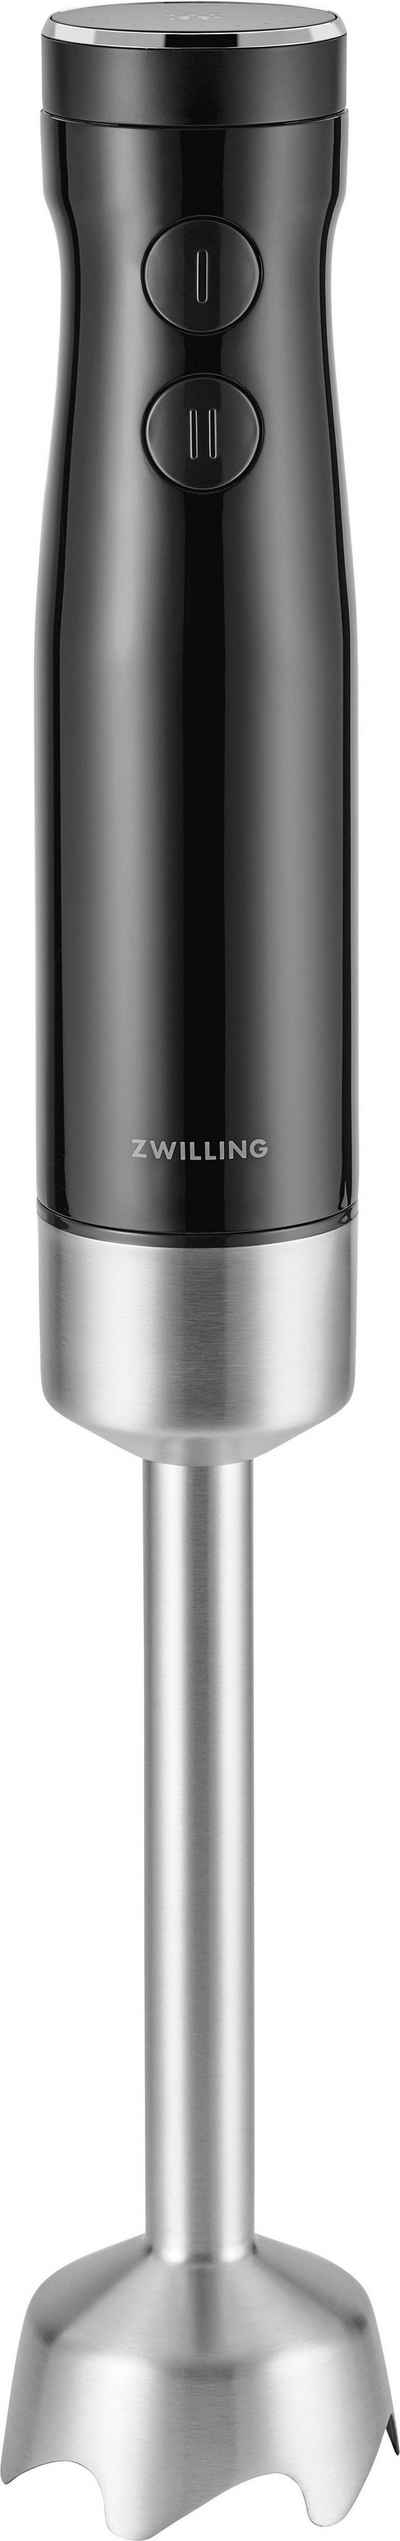 Zwilling Stabmixer ZWILLING ENFINIGY Stabmixer Edelstahl, 800,00 W